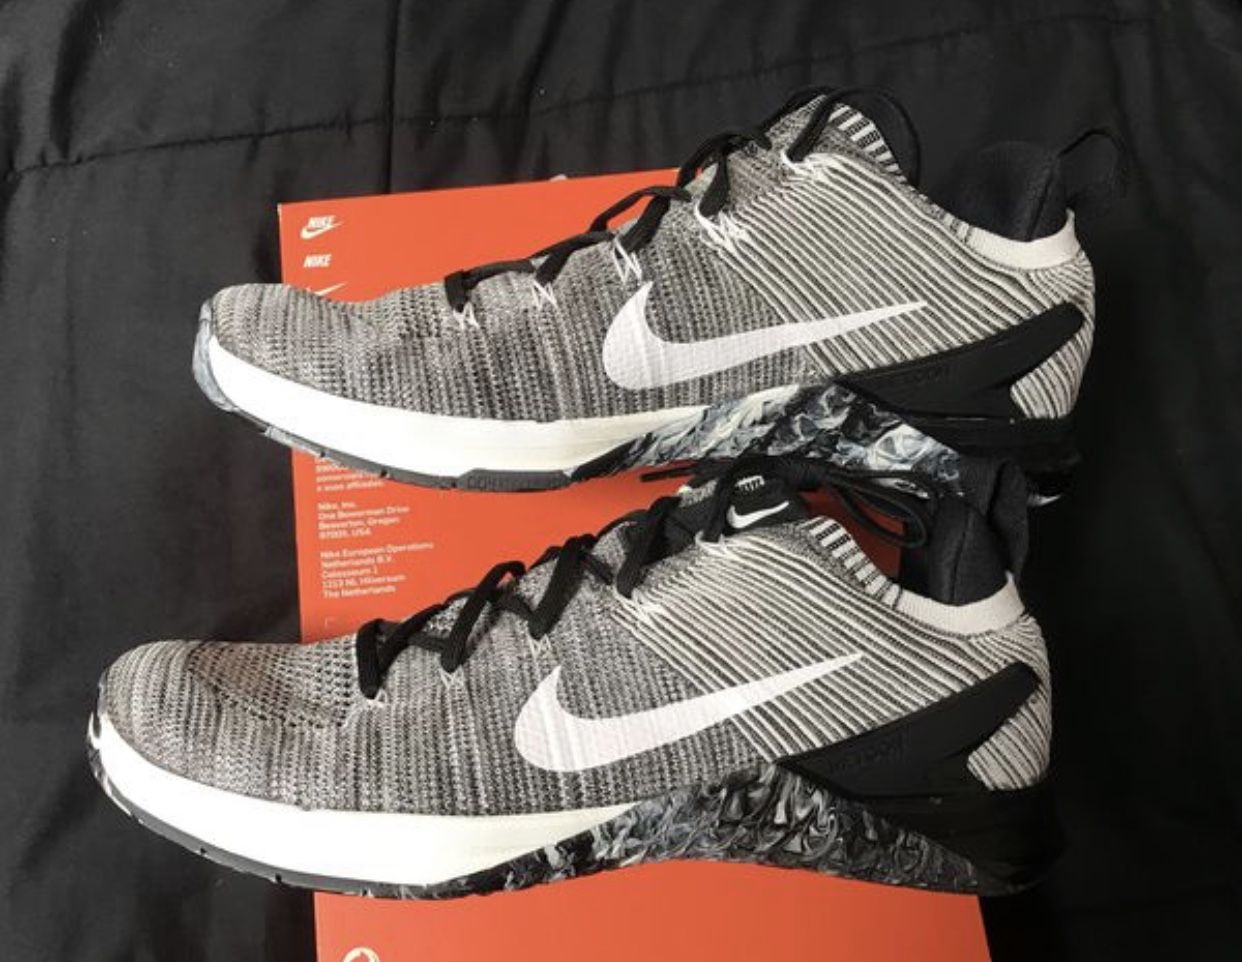 Nike Metcon DSX Flyknit 2 Mens Size 7.5 CrossFit workout shoes NEW DS!